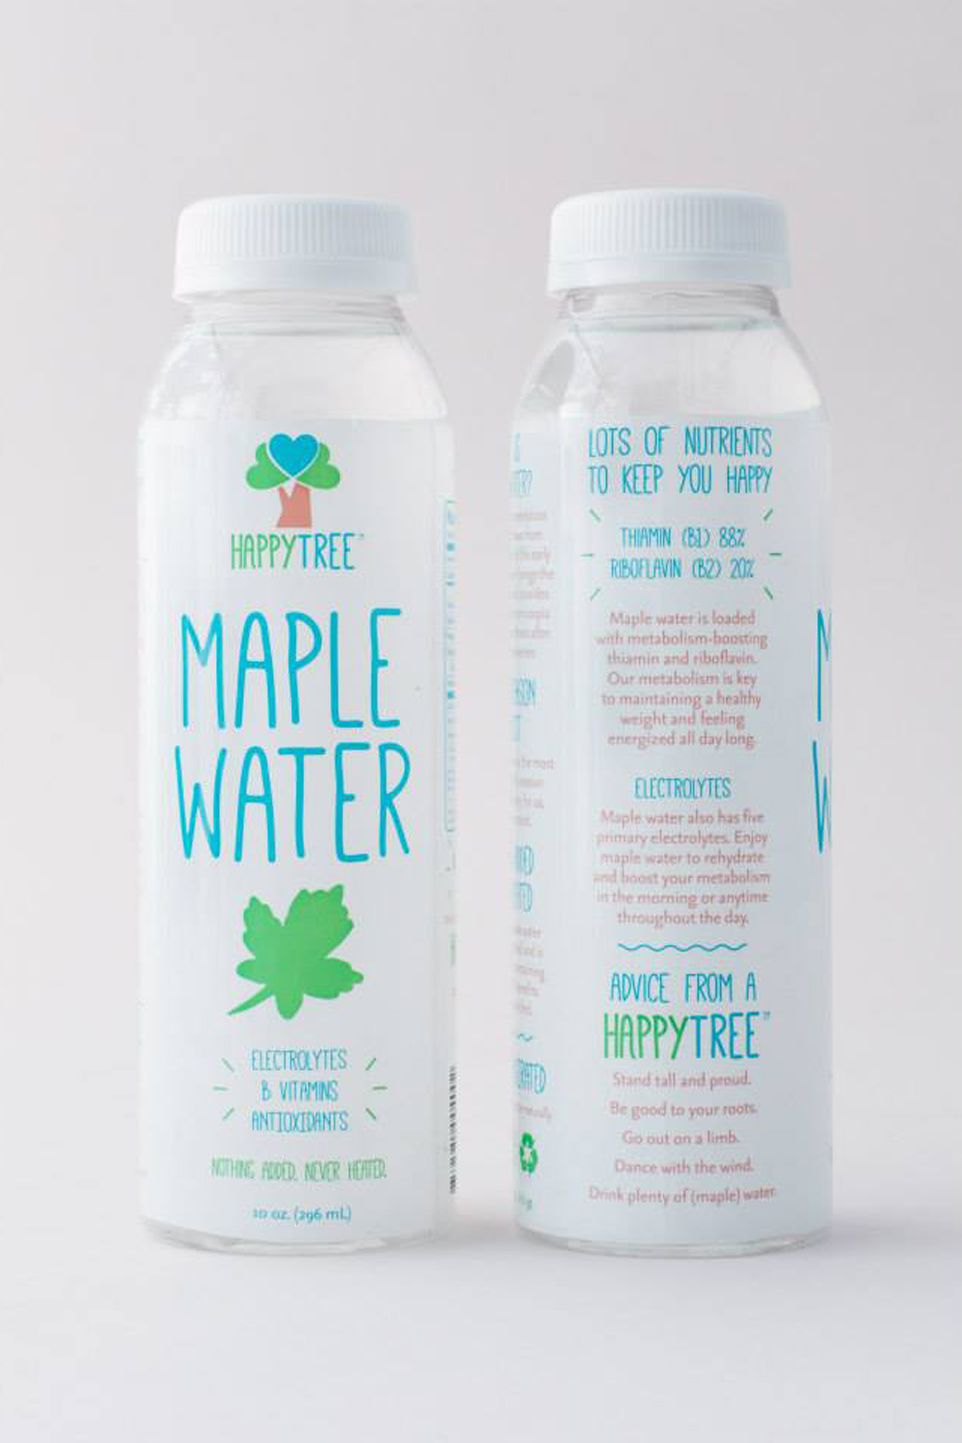 maple water, 10 best carbs to lose weight